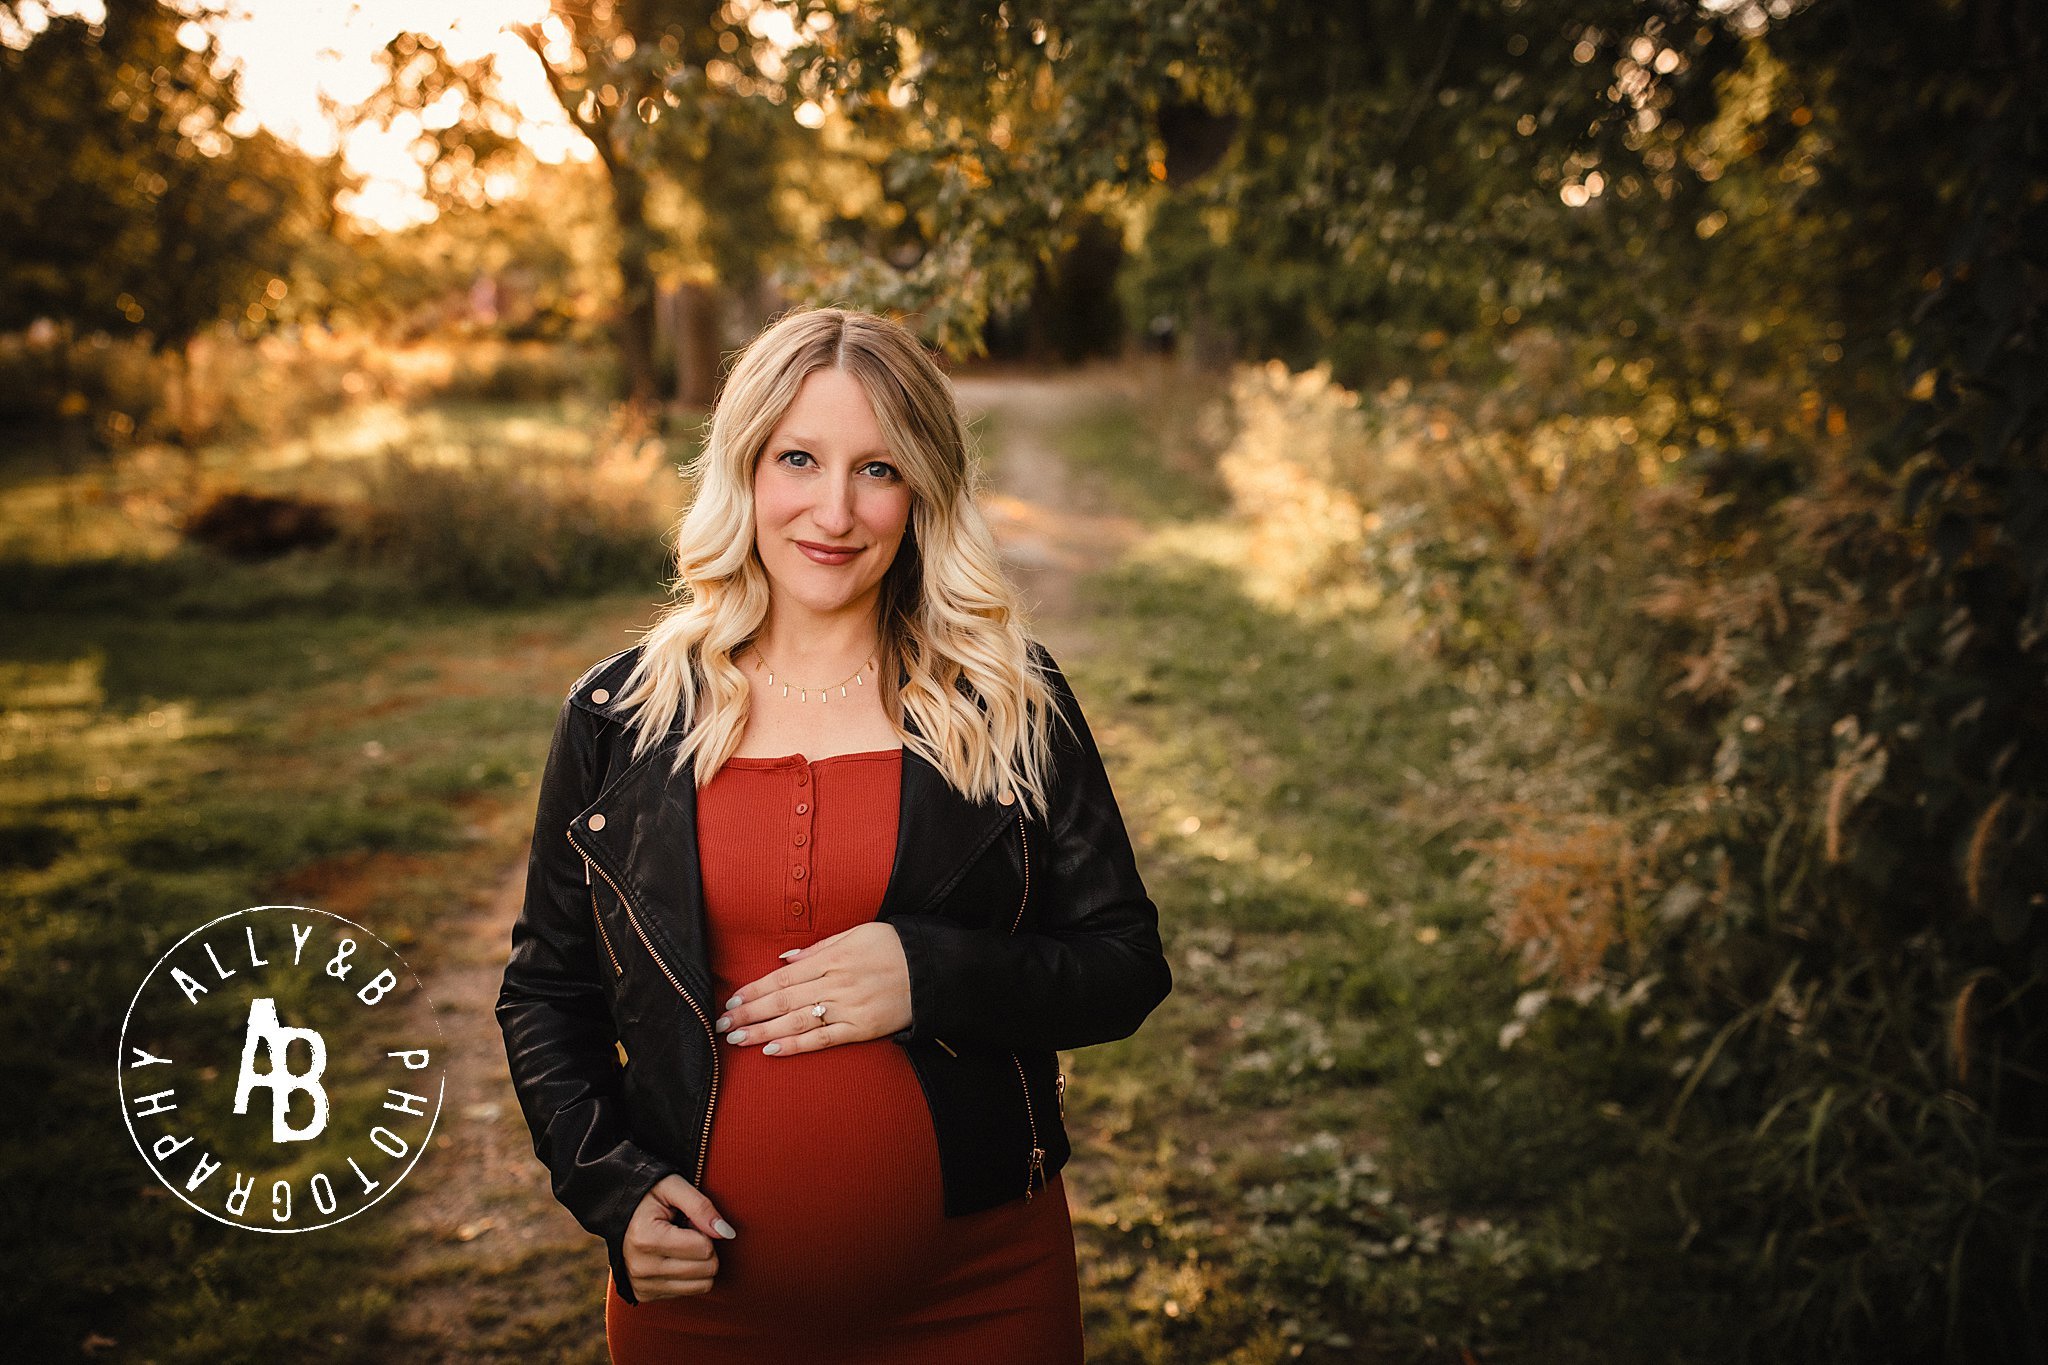 maternity photographer in naperville il.jpg